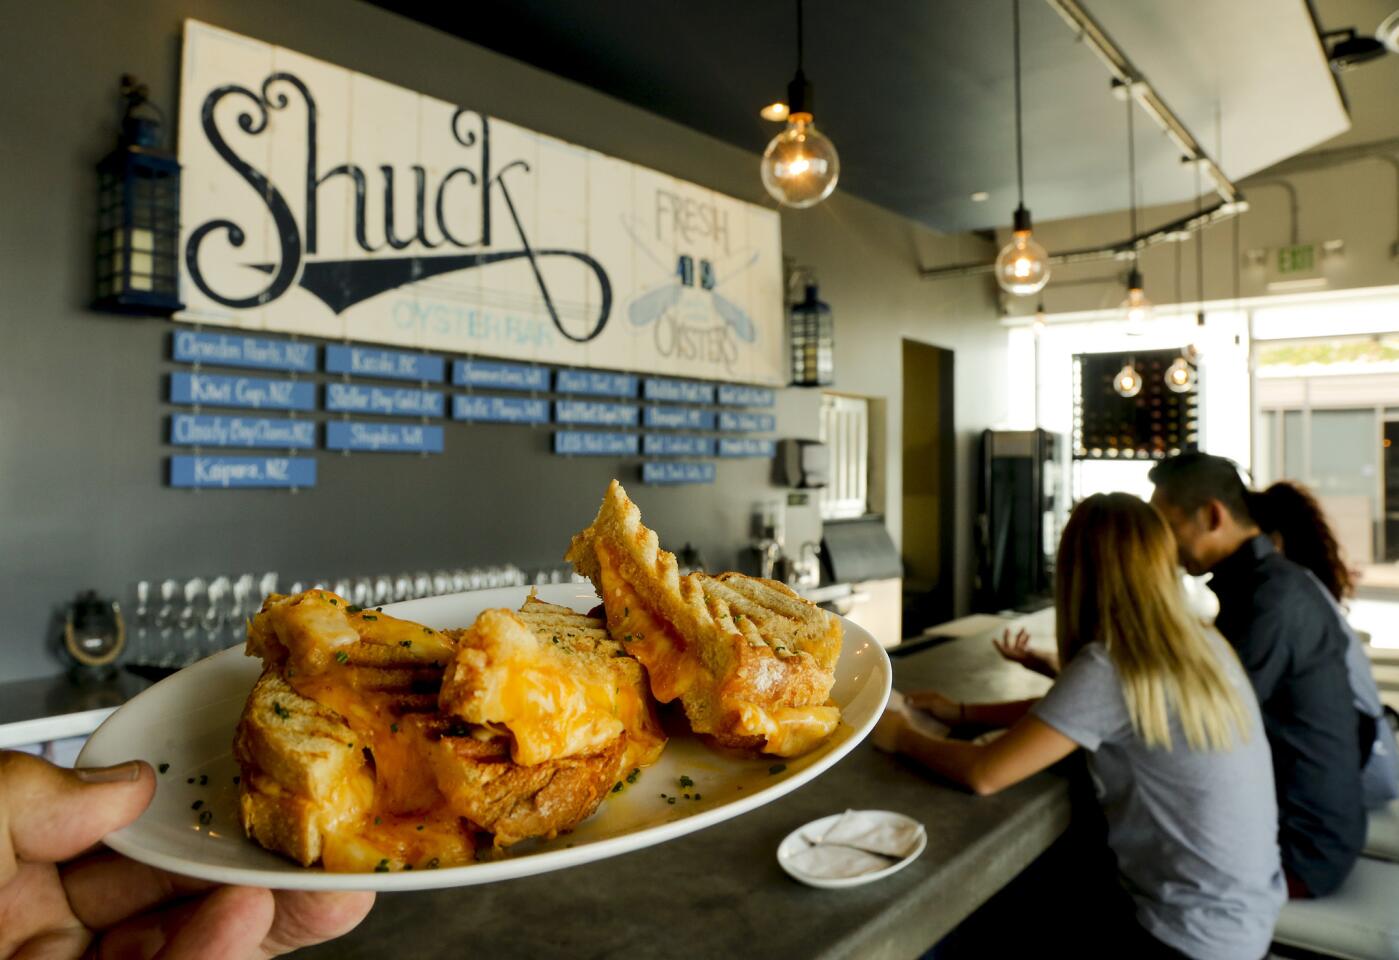 The grilled cheese is one of the signature dishes at Shuck in the OC Mix at SoCo in Costa Mesa.